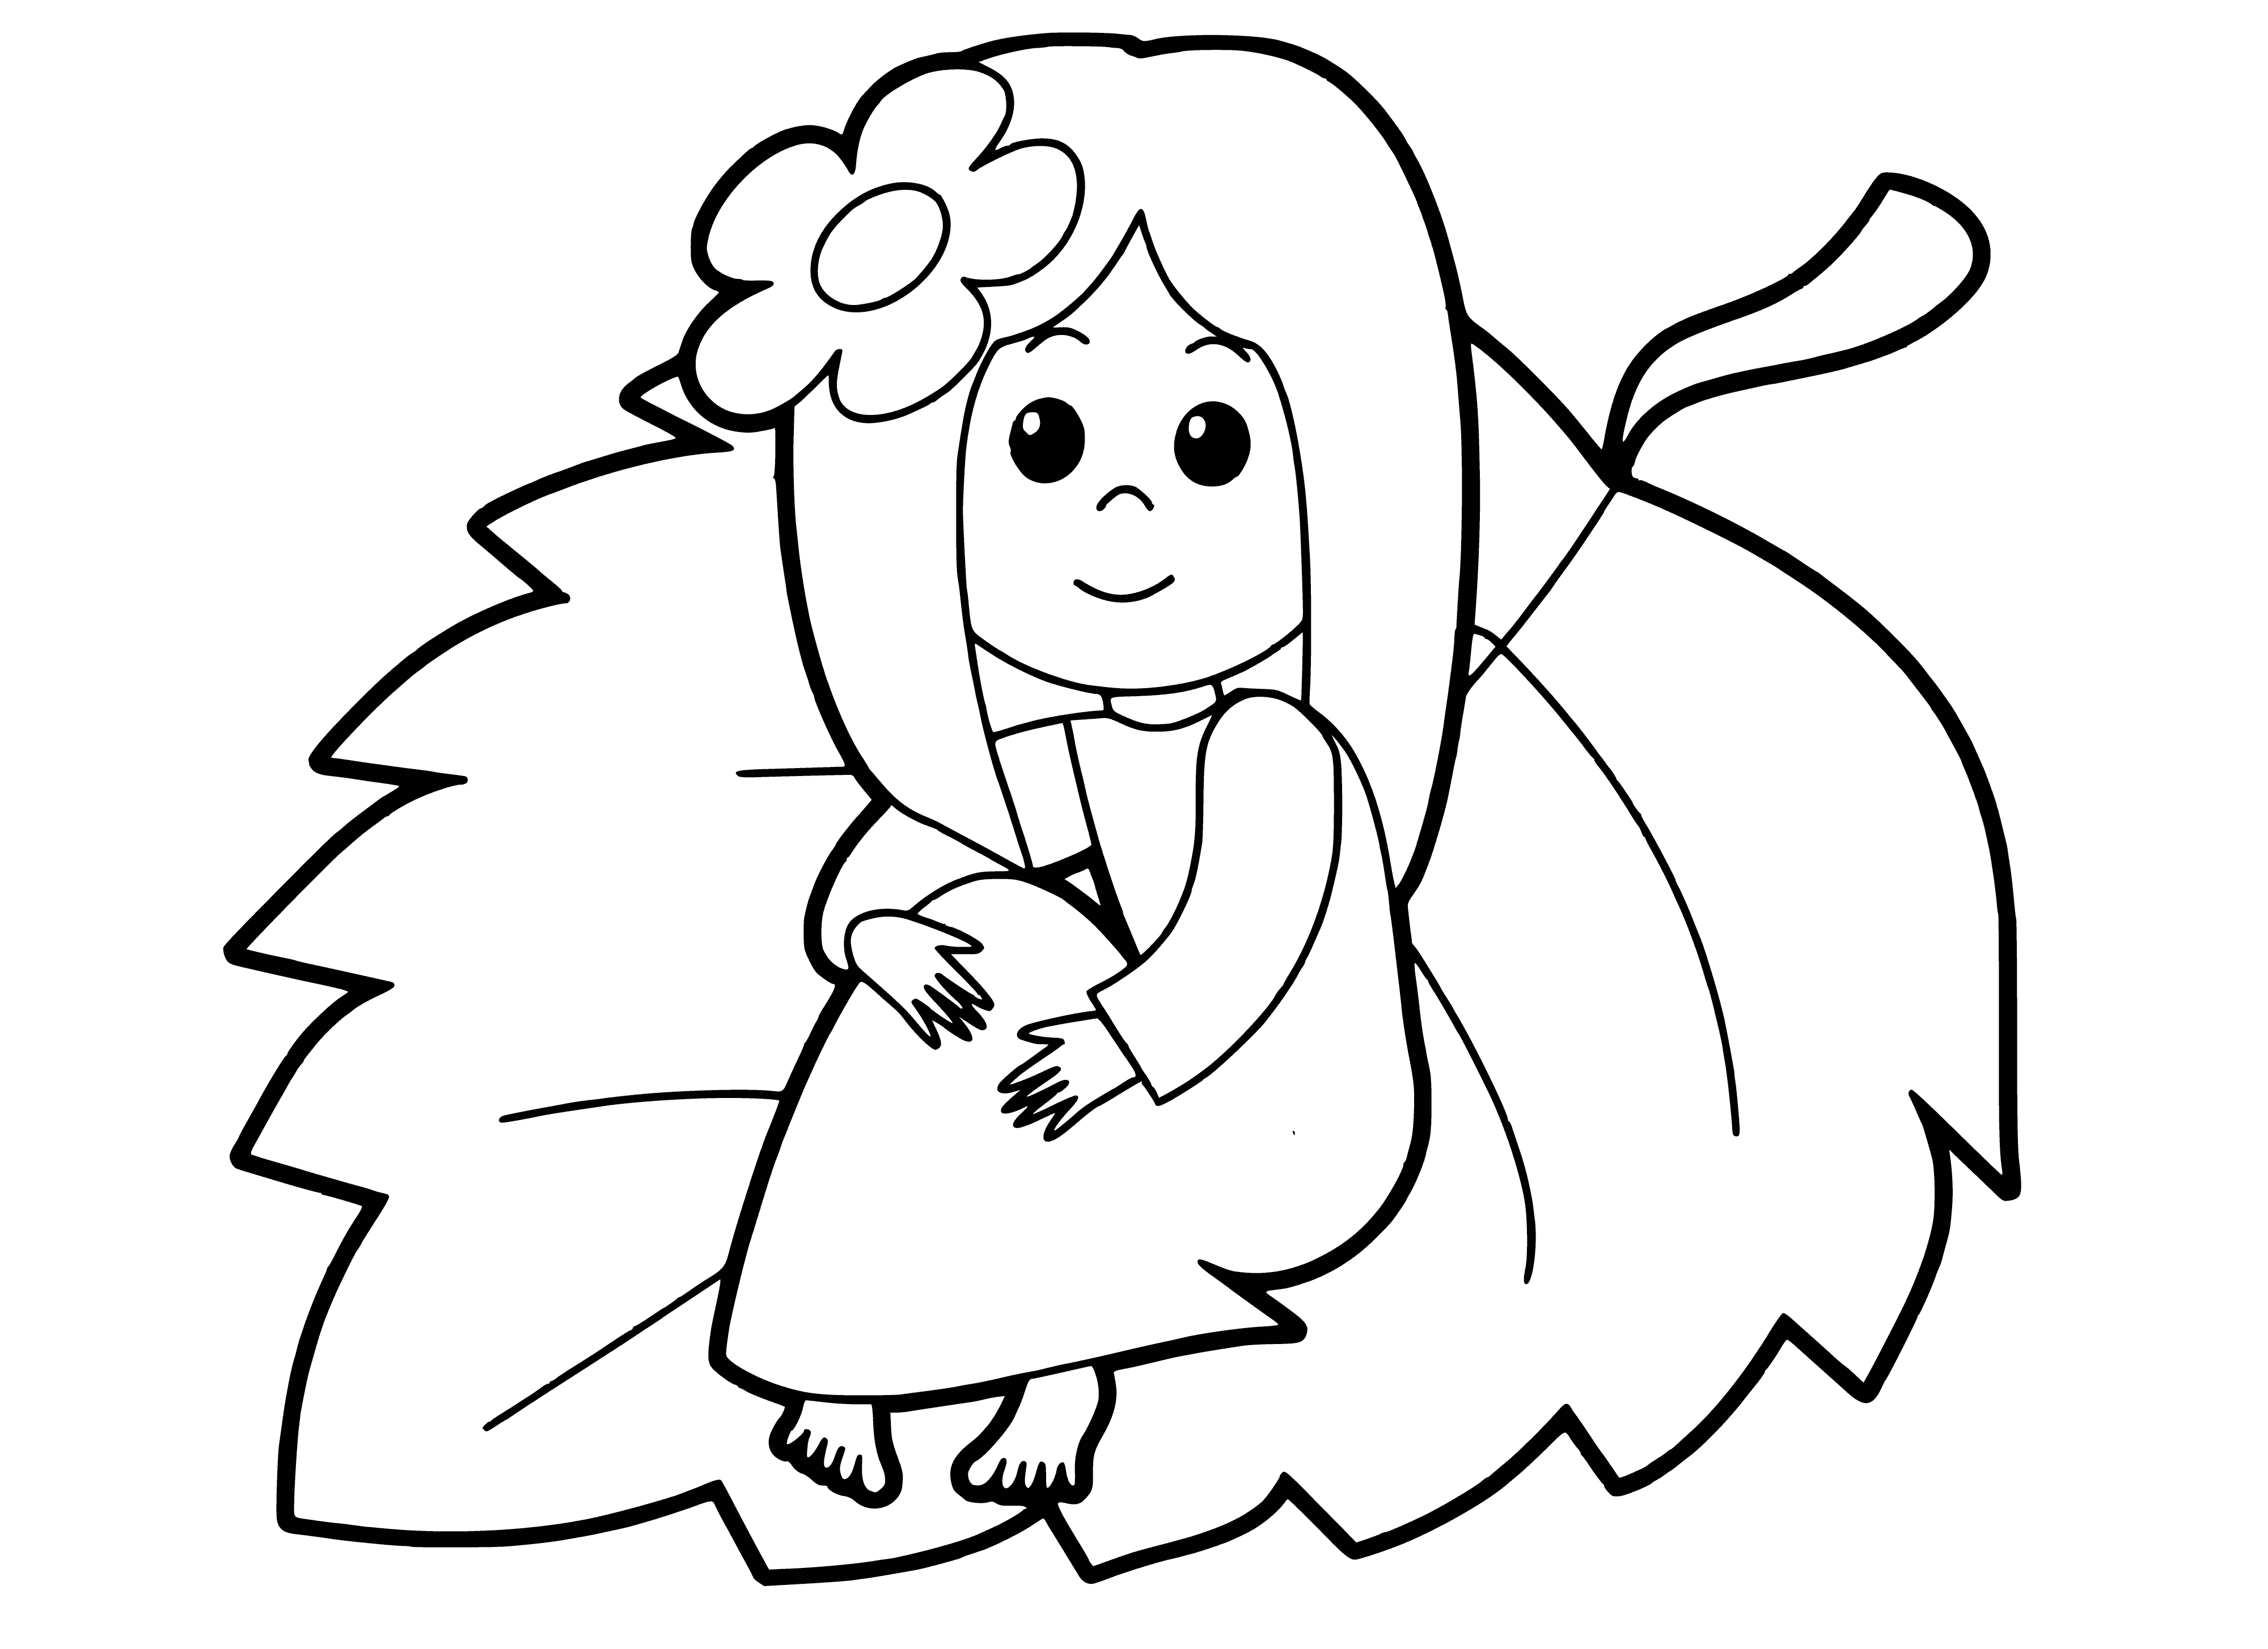 coloring page: Girl in yellow dress holds teddy bear, green-white striped hat w/ red bow. Pale blue background, white clouds.